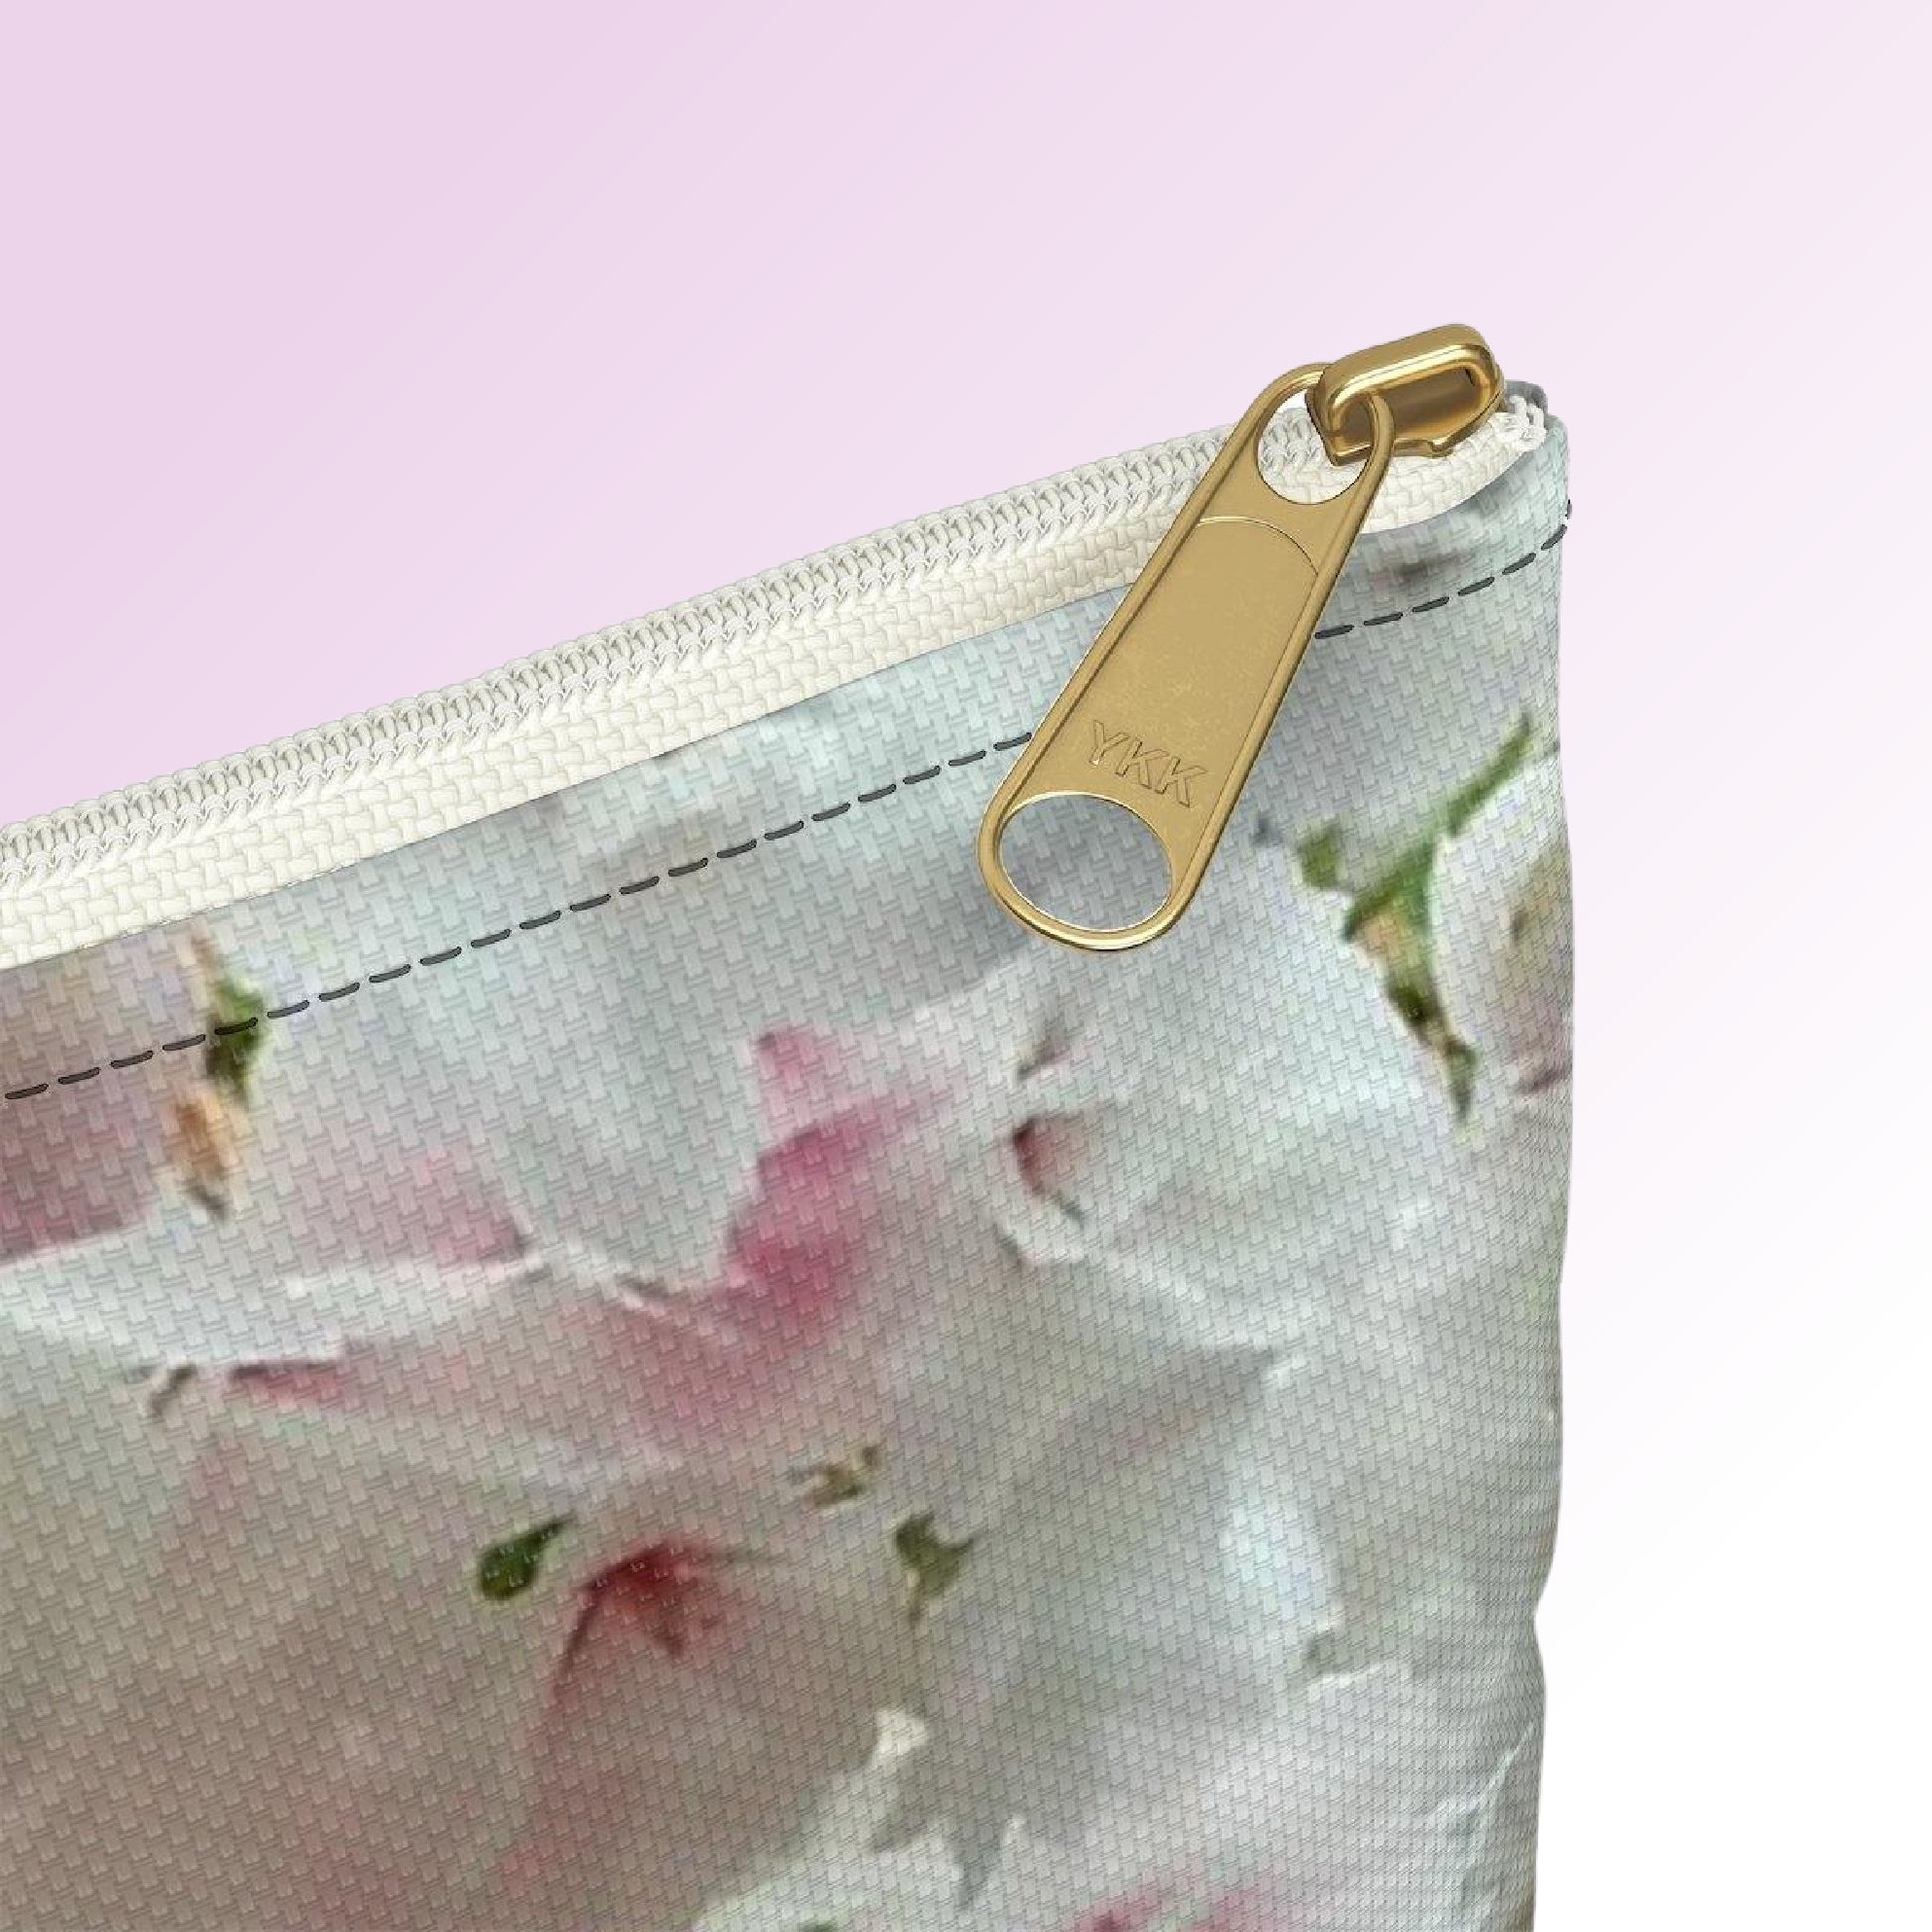 Close up of the zipper details for our White-Floral Travel Pouch